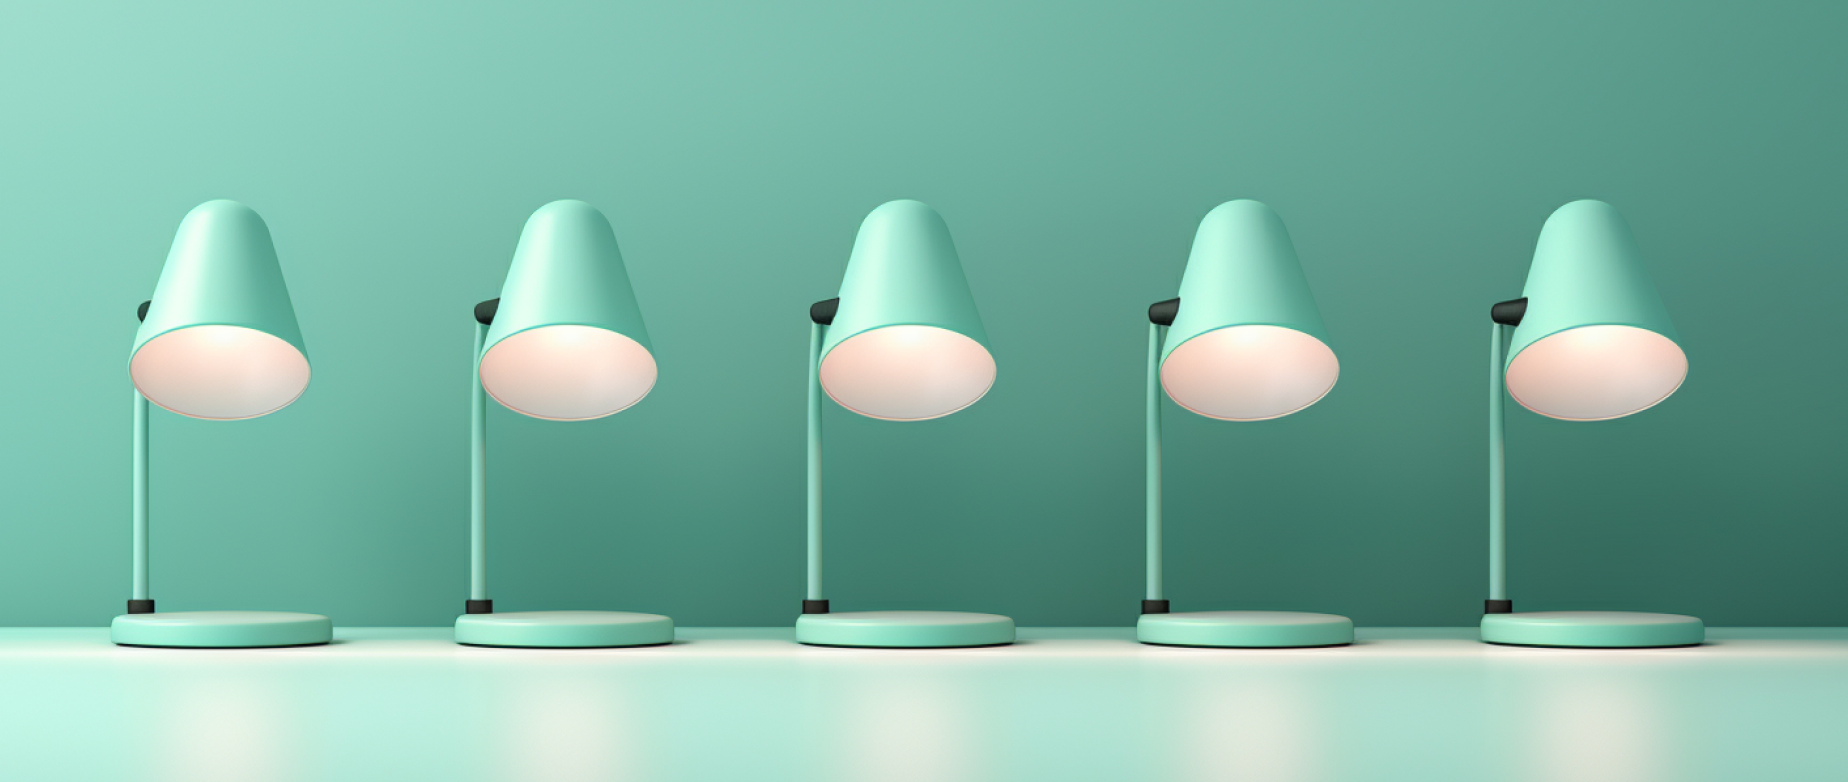 Five teal lights next to each other on a teal background.